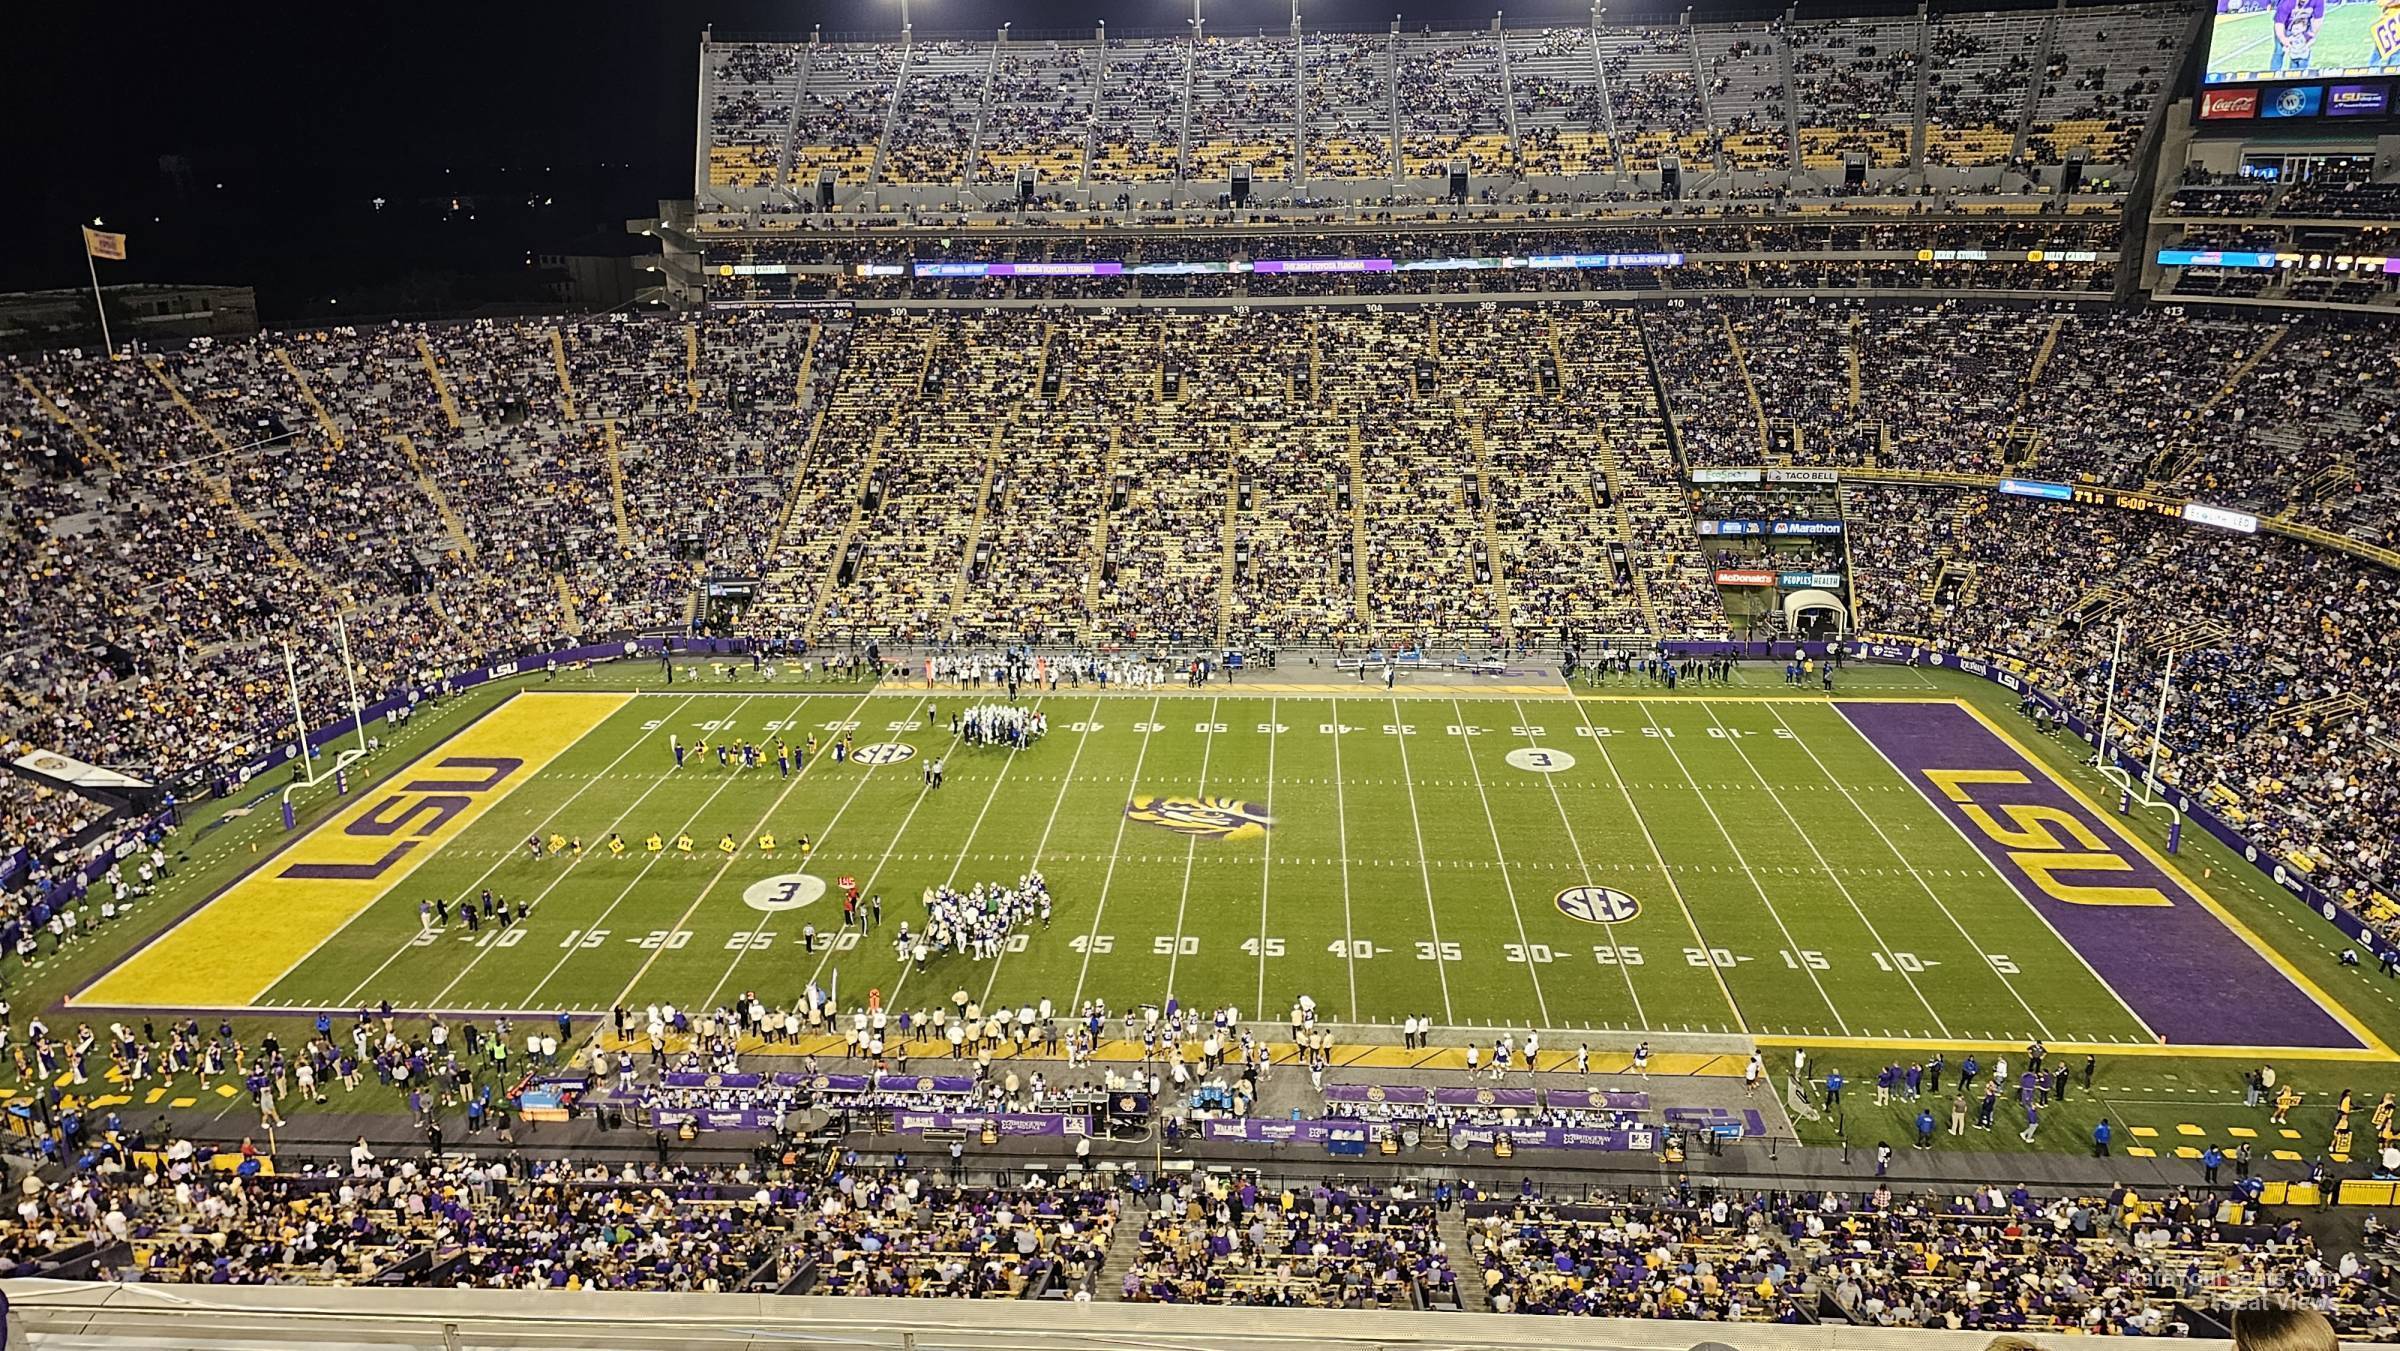 section 516, row 4 seat view  - tiger stadium